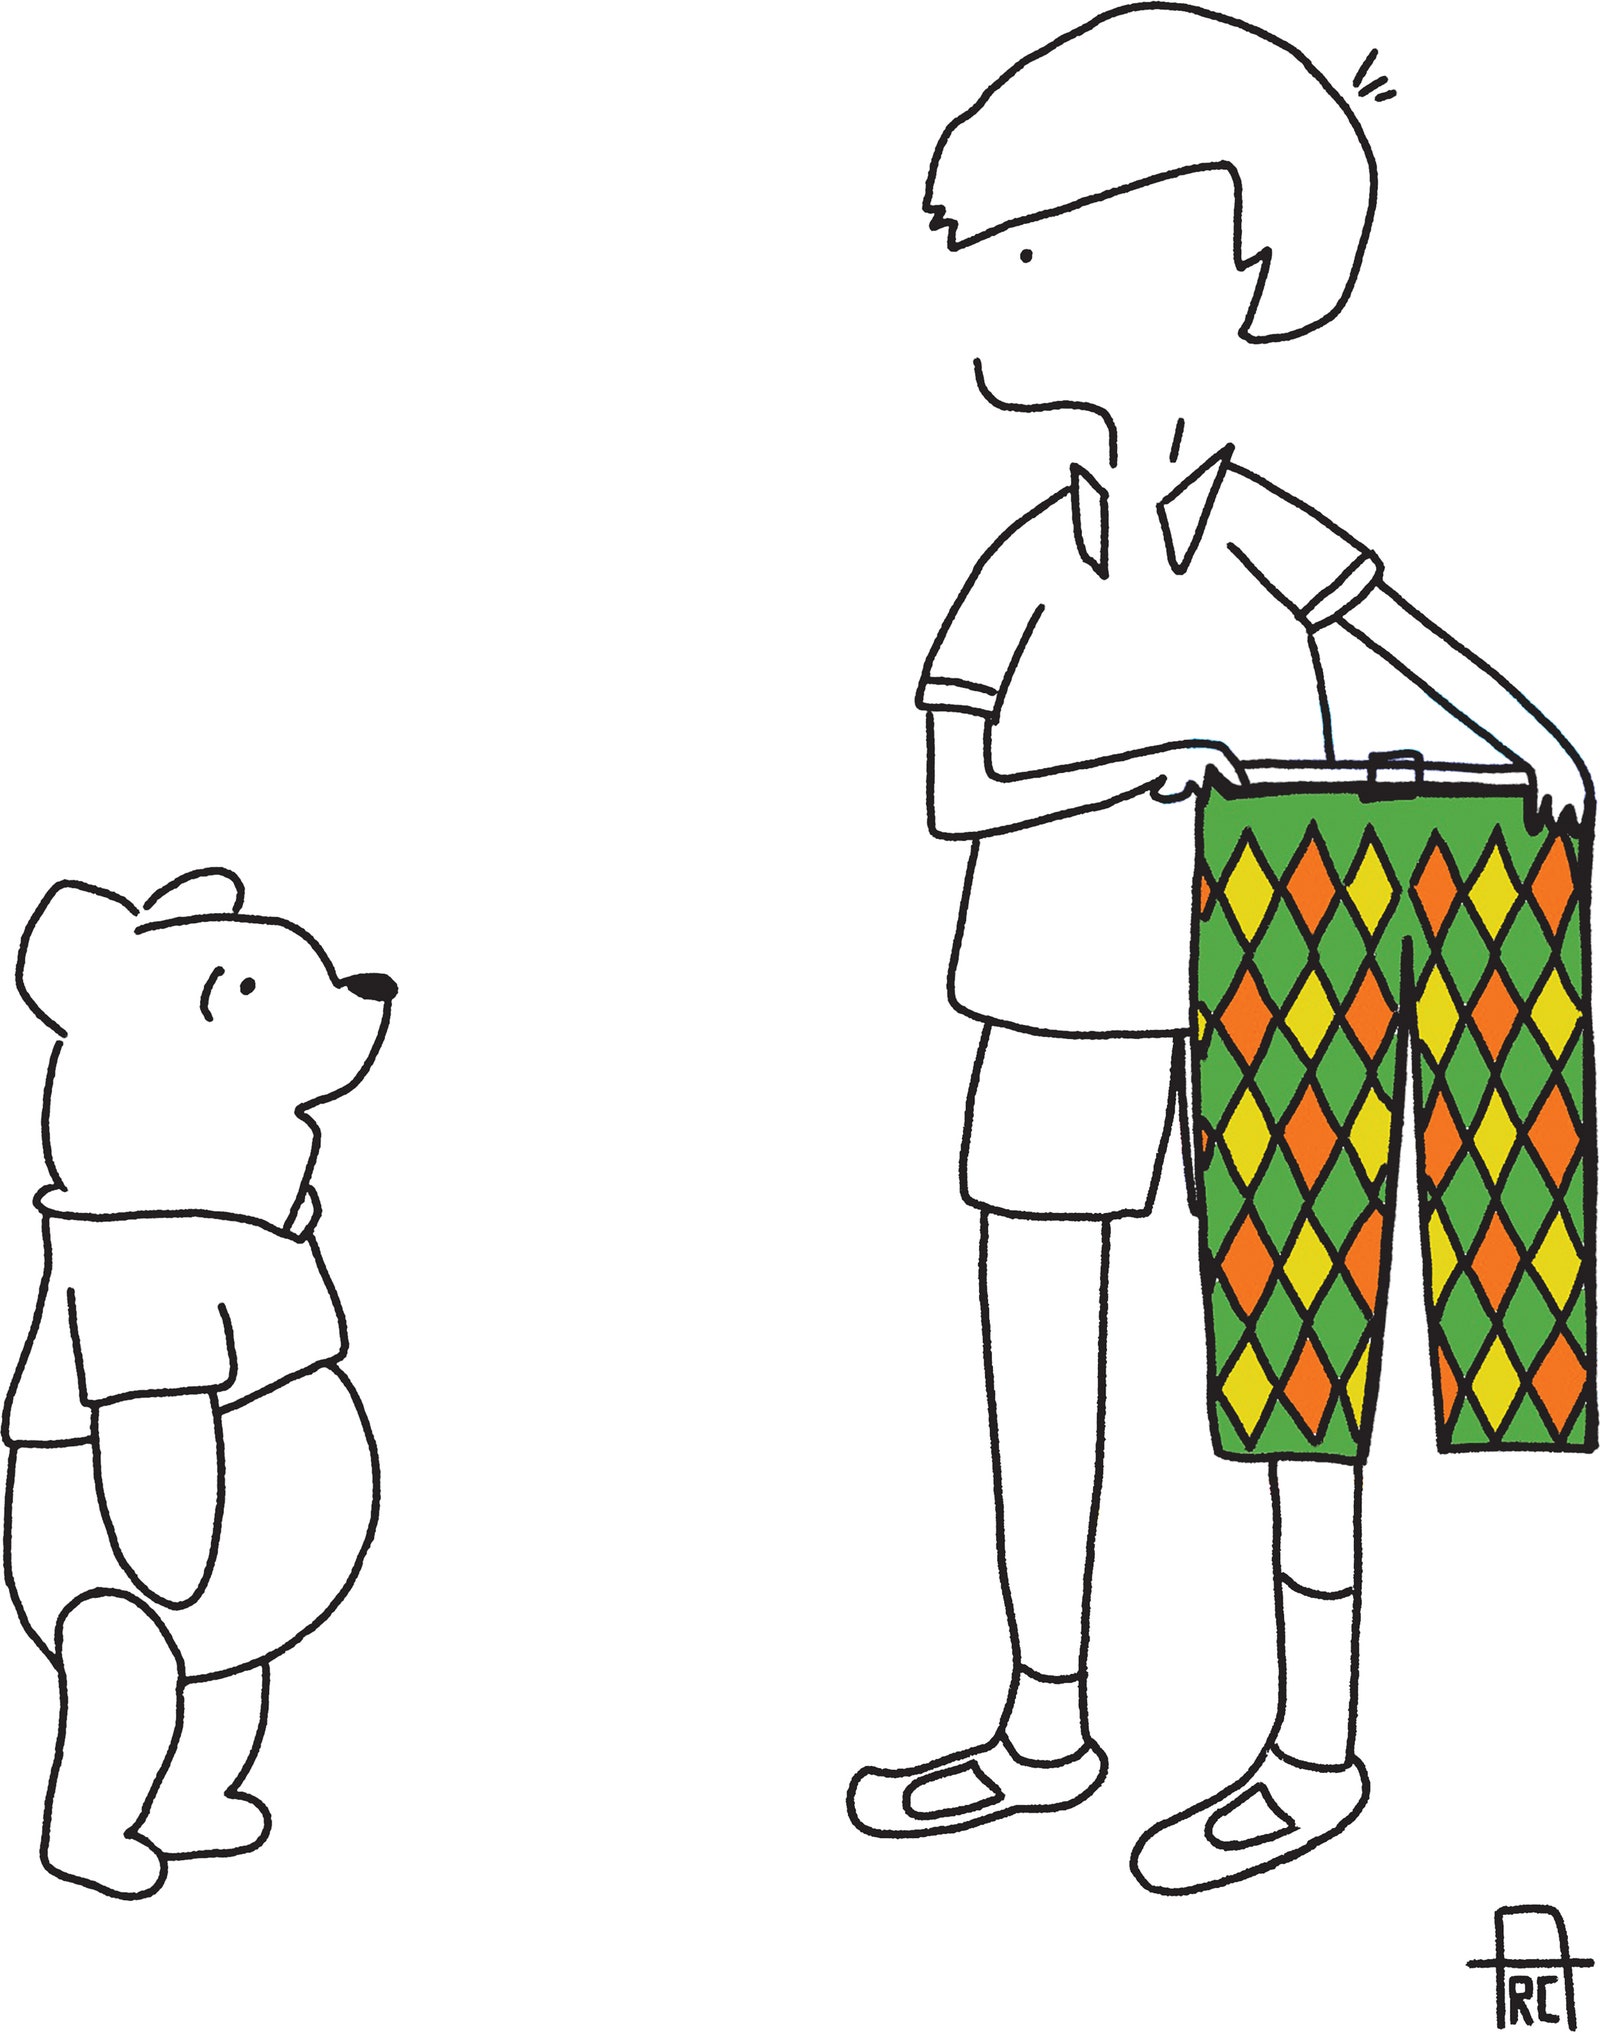 Christopher Robin offers Winnie the Pooh colorful argyle pants.